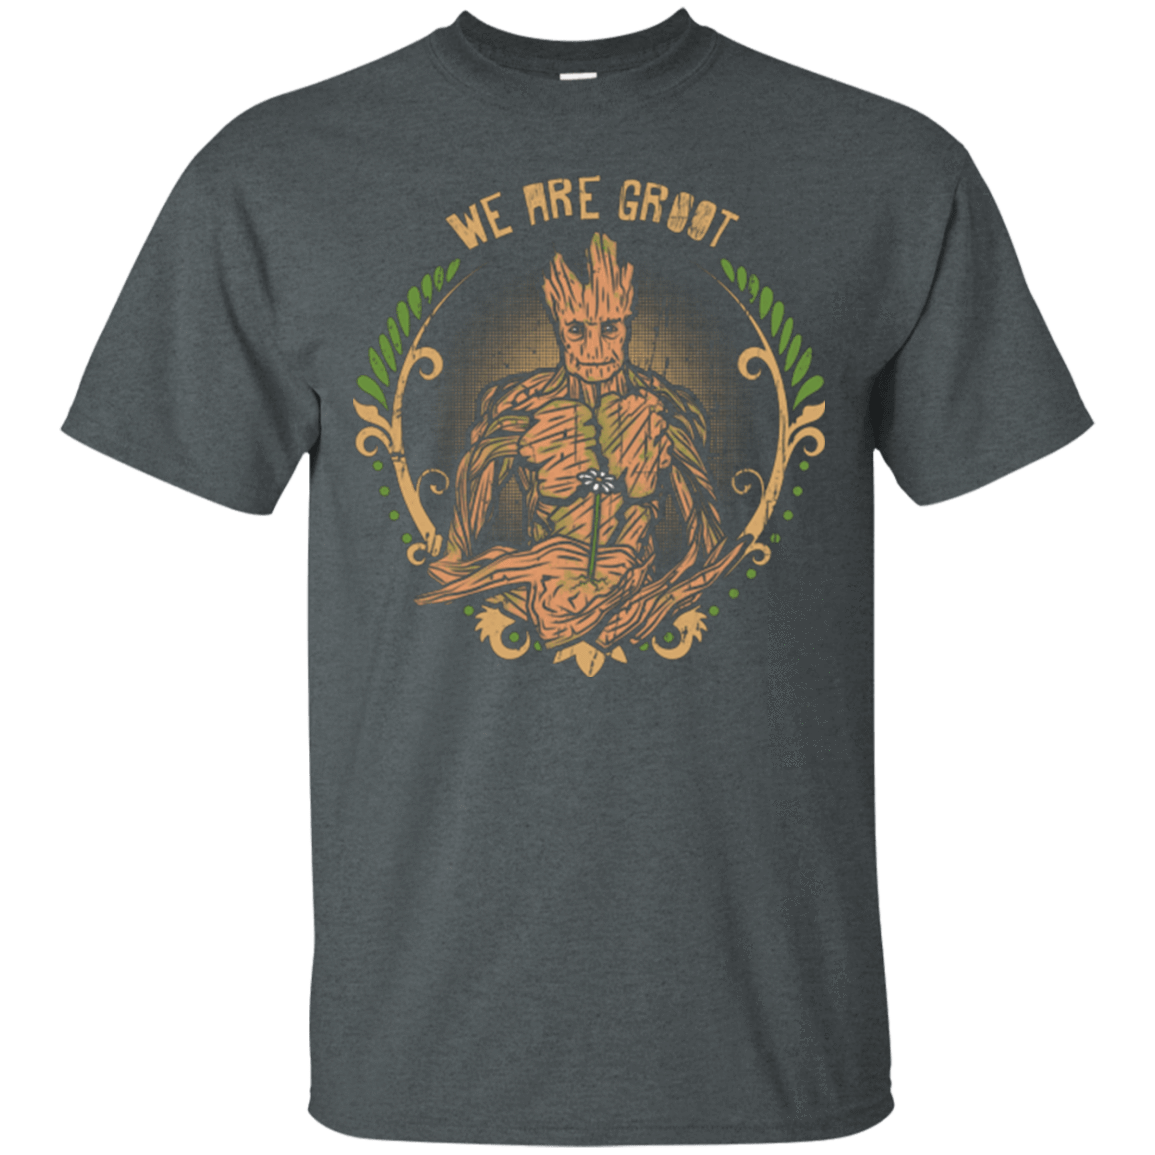 We are Groot T-Shirt – Pop Up Tee